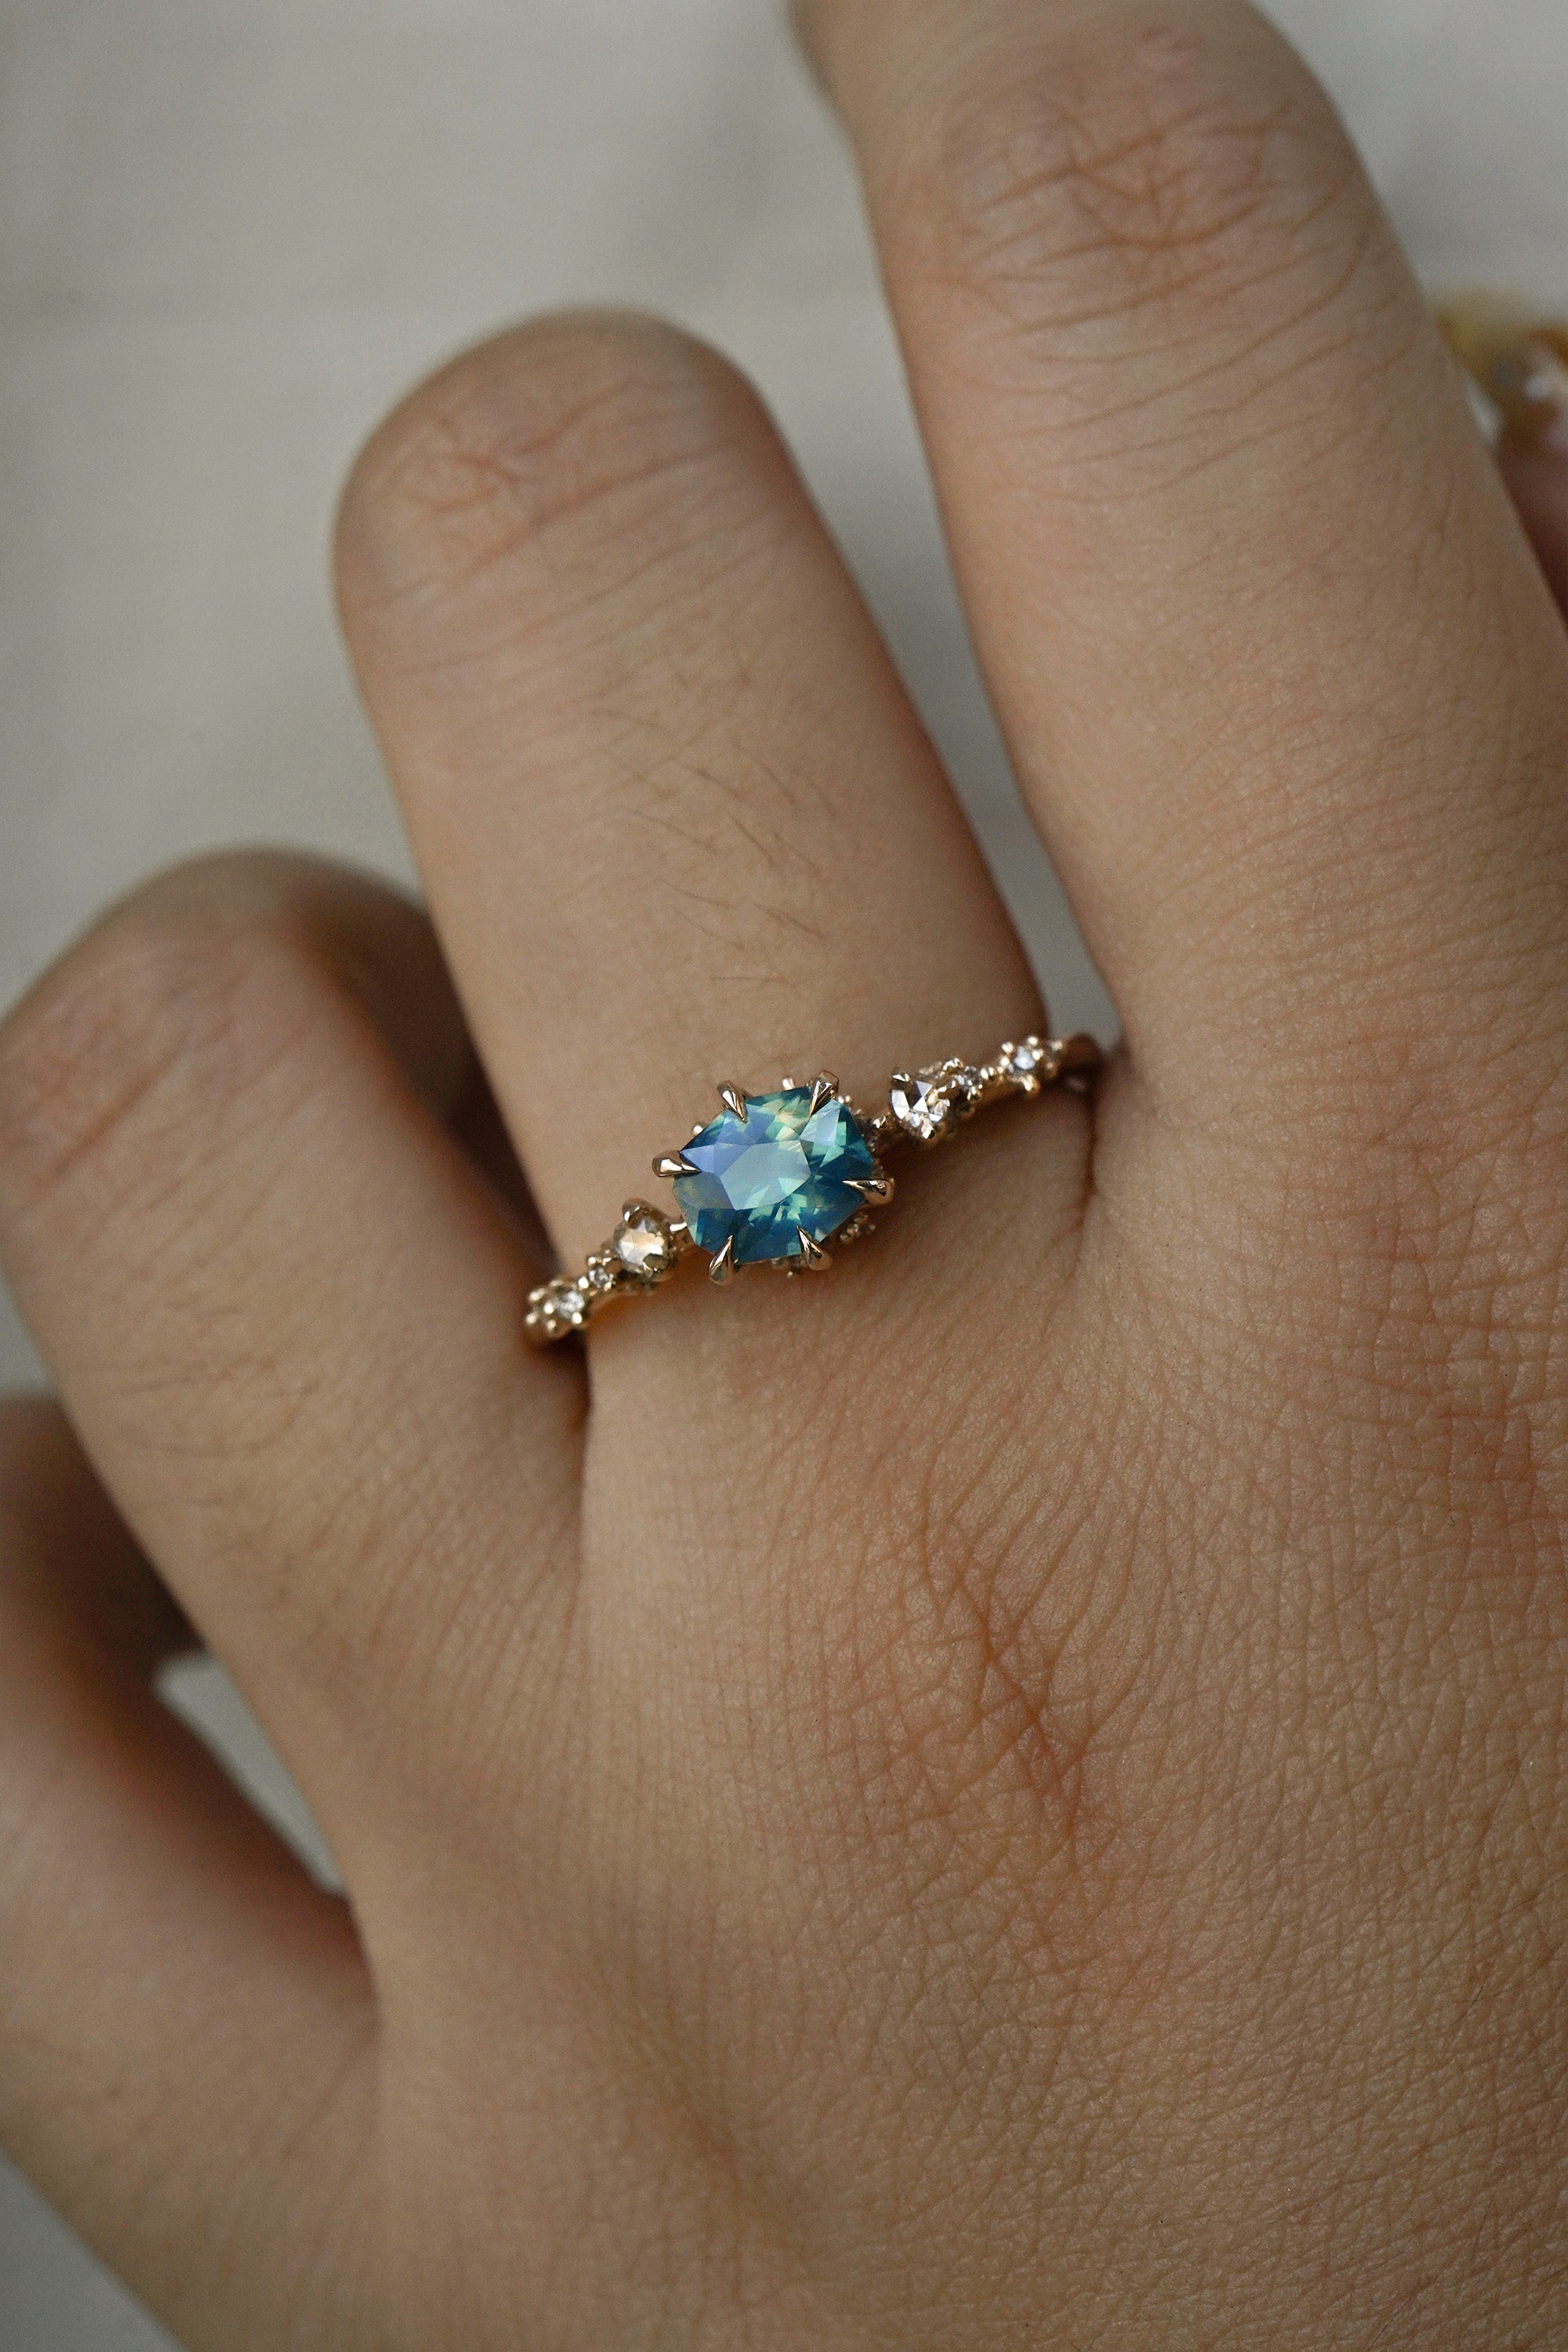 A delicate and ethereal "Nereid" one of a kind engagement ring by Laurie Fleming Jewellery, with a unique opalescent silky teal/turquoise/blue sapphire in a geometric oval cut. The band is adorned with rose and brilliant cut diamonds and the ring is made in solid 14k champagne gold. The ring is worn on a hand against a plain light grey background.